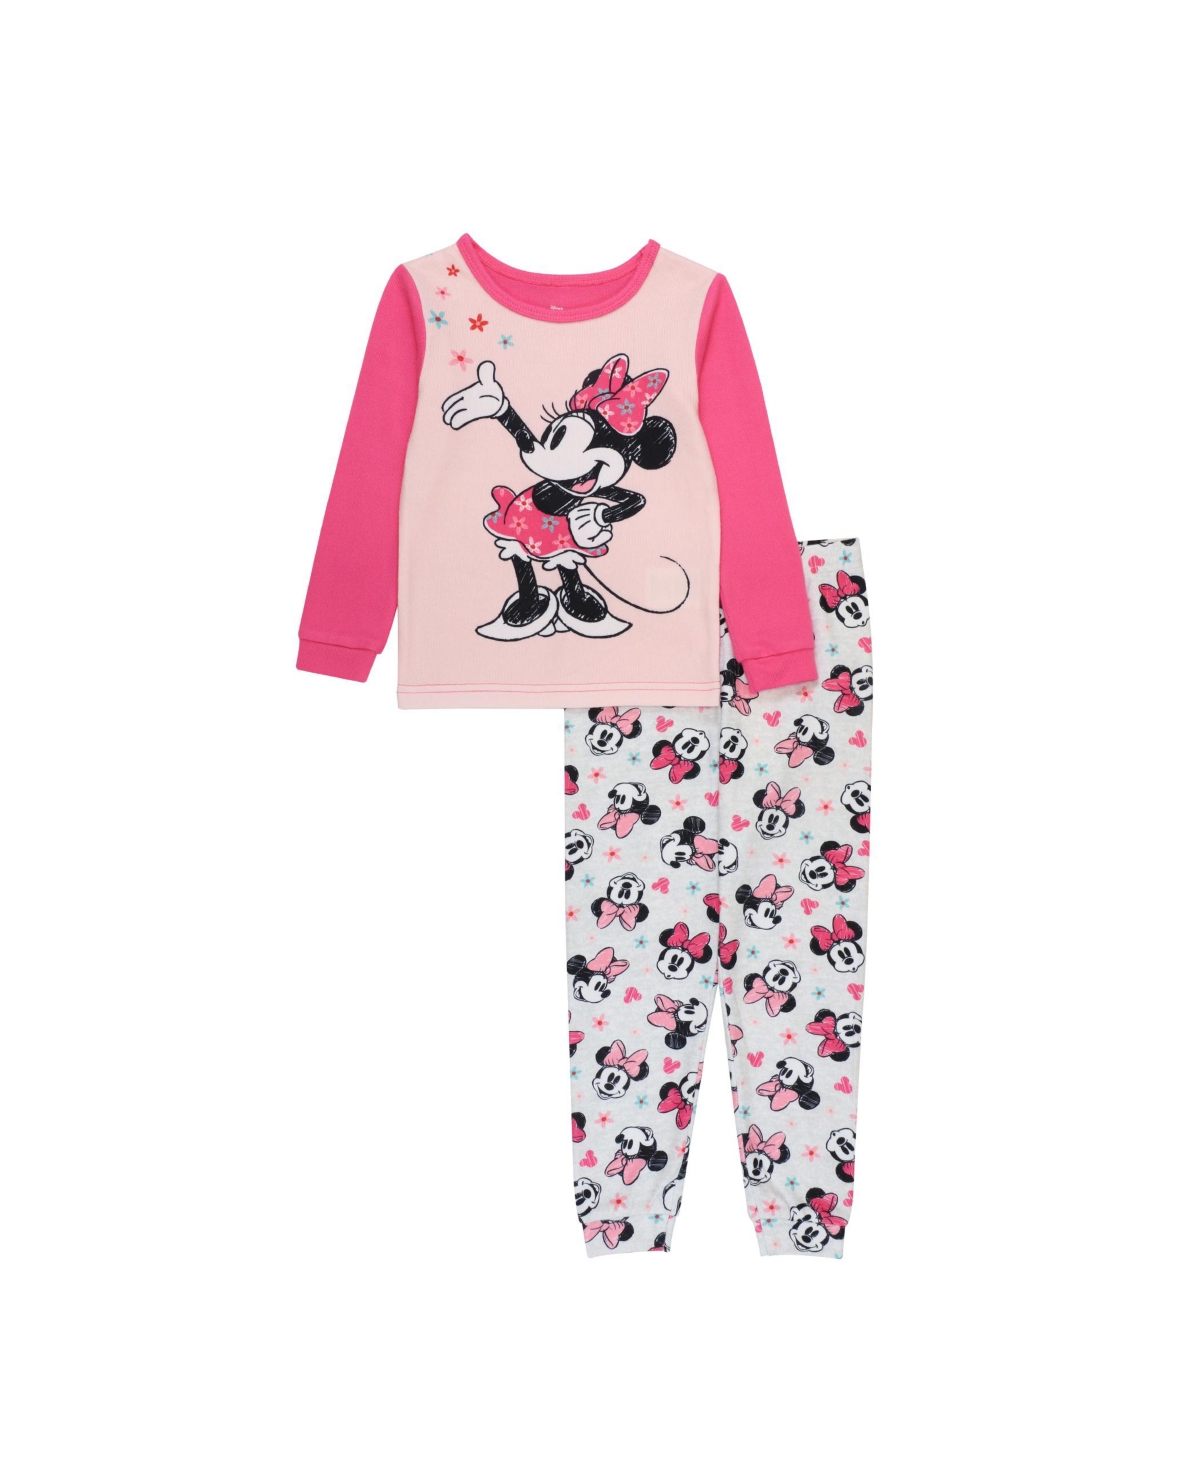 Ame Toddler Girls Minnie Mouse T-shirt And Pajama, 2 Piece Set In Multi